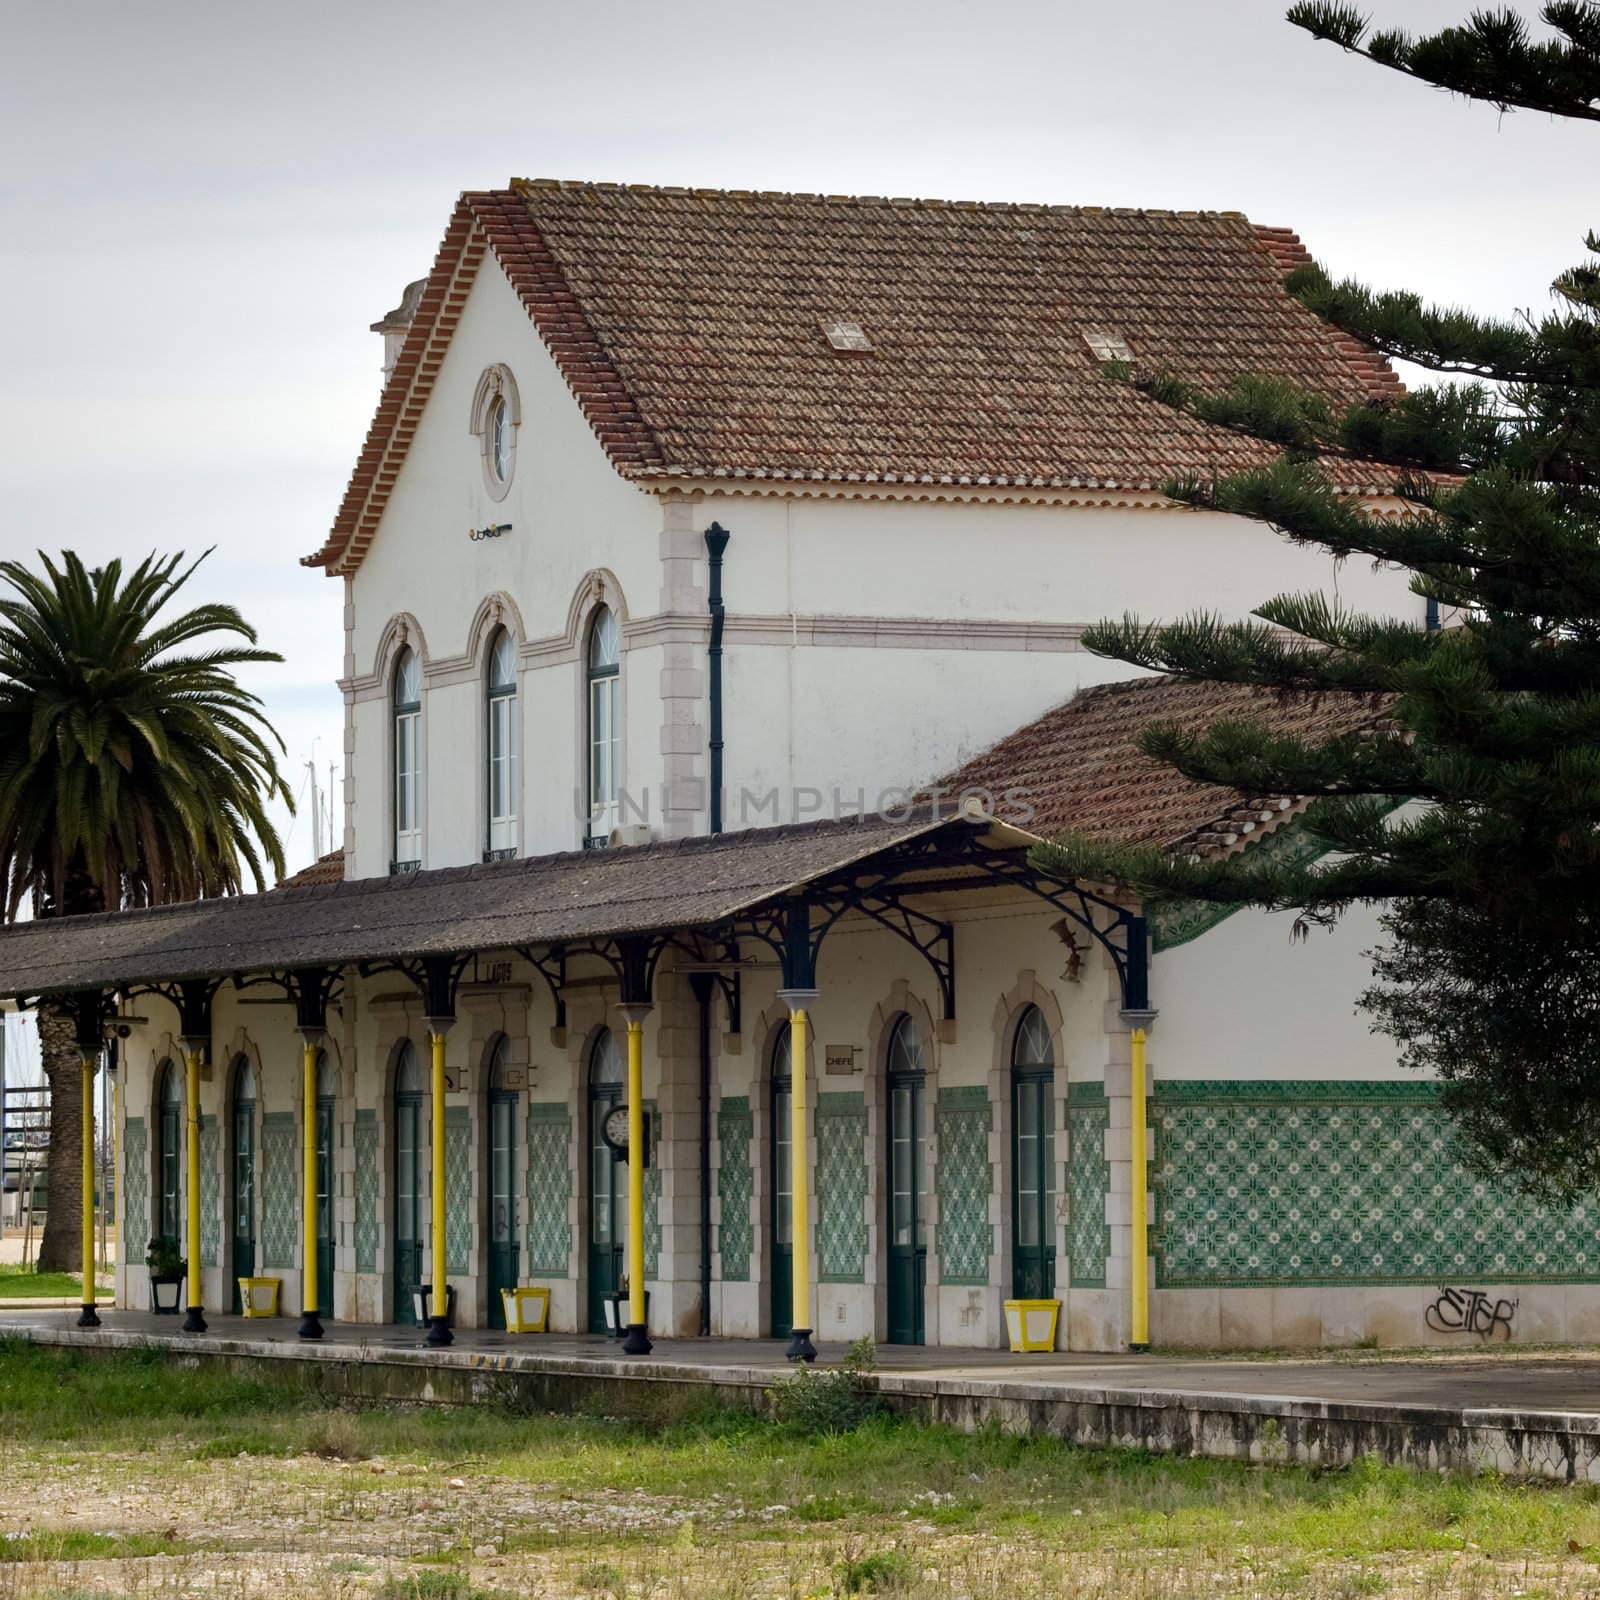 An abandoned railway station with open space in front, where railway tracks once sat.  Lagos, Portugal.